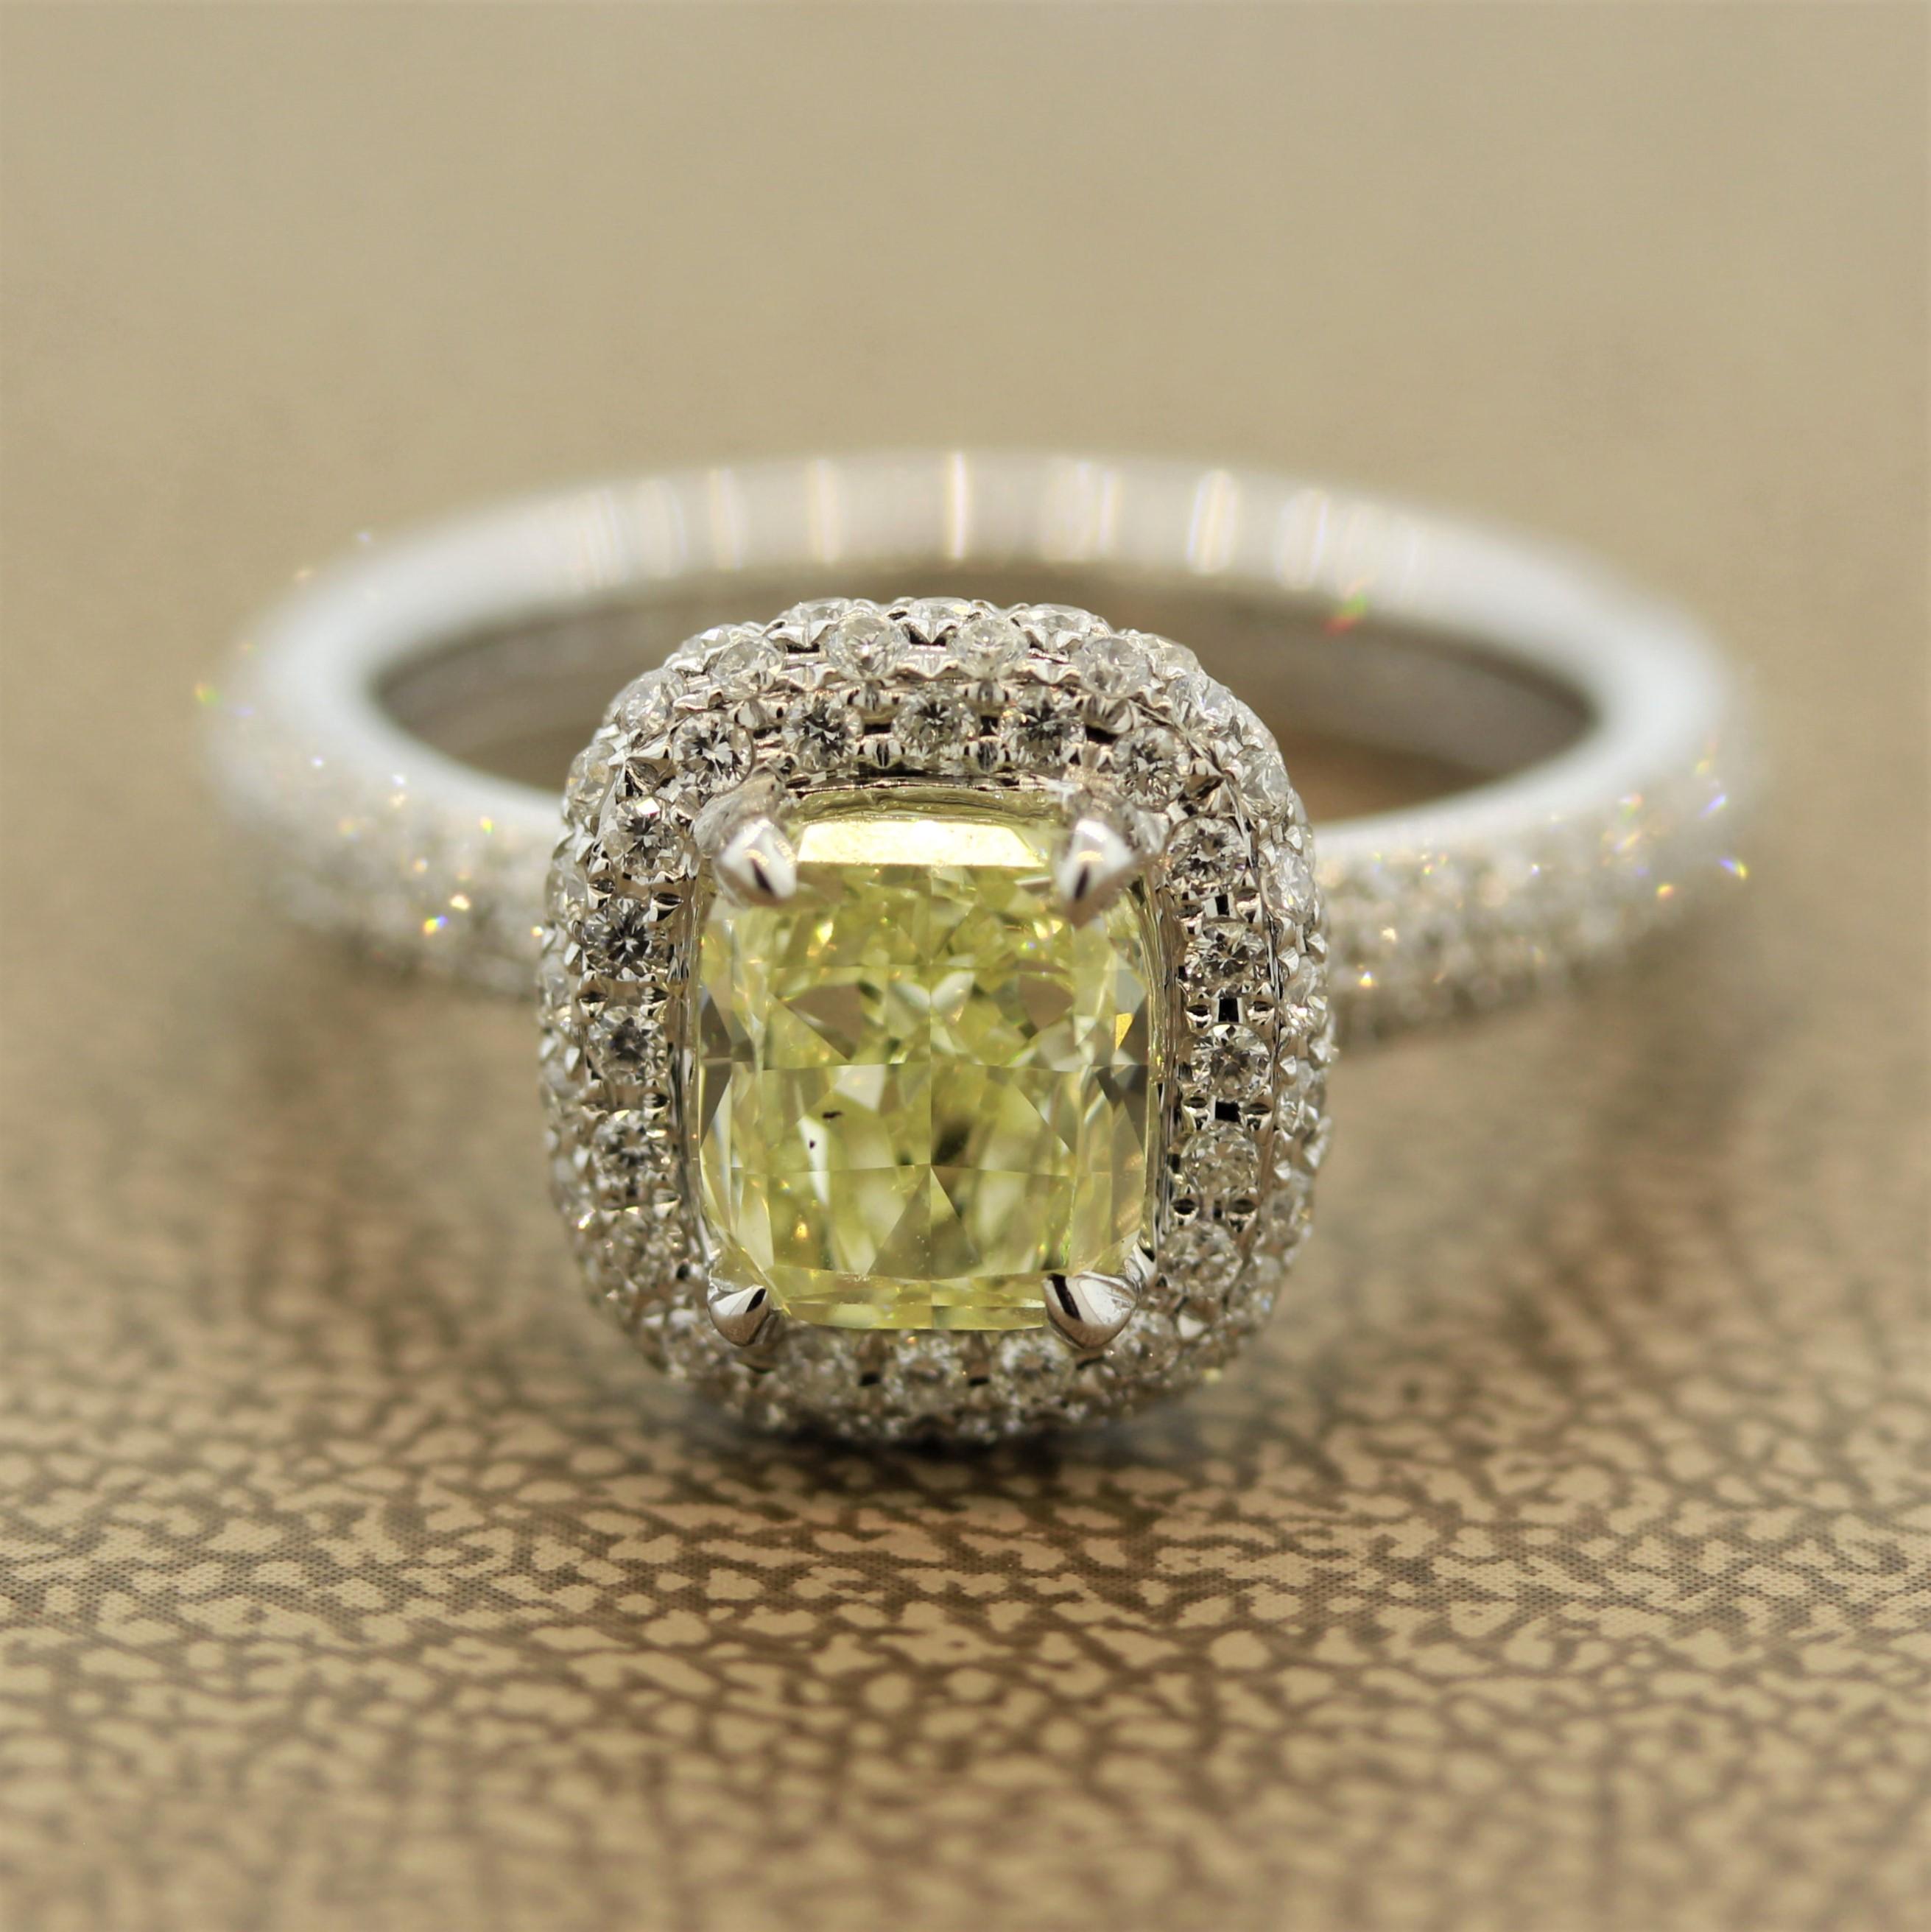 A stunning design, this engagement ring features a 1.32 carat cushion shaped fancy yellow diamond with VS clarity. It is accented by 0.95 carats of round brilliant cut diamonds set all around the basket of the ring as well are running down the shank